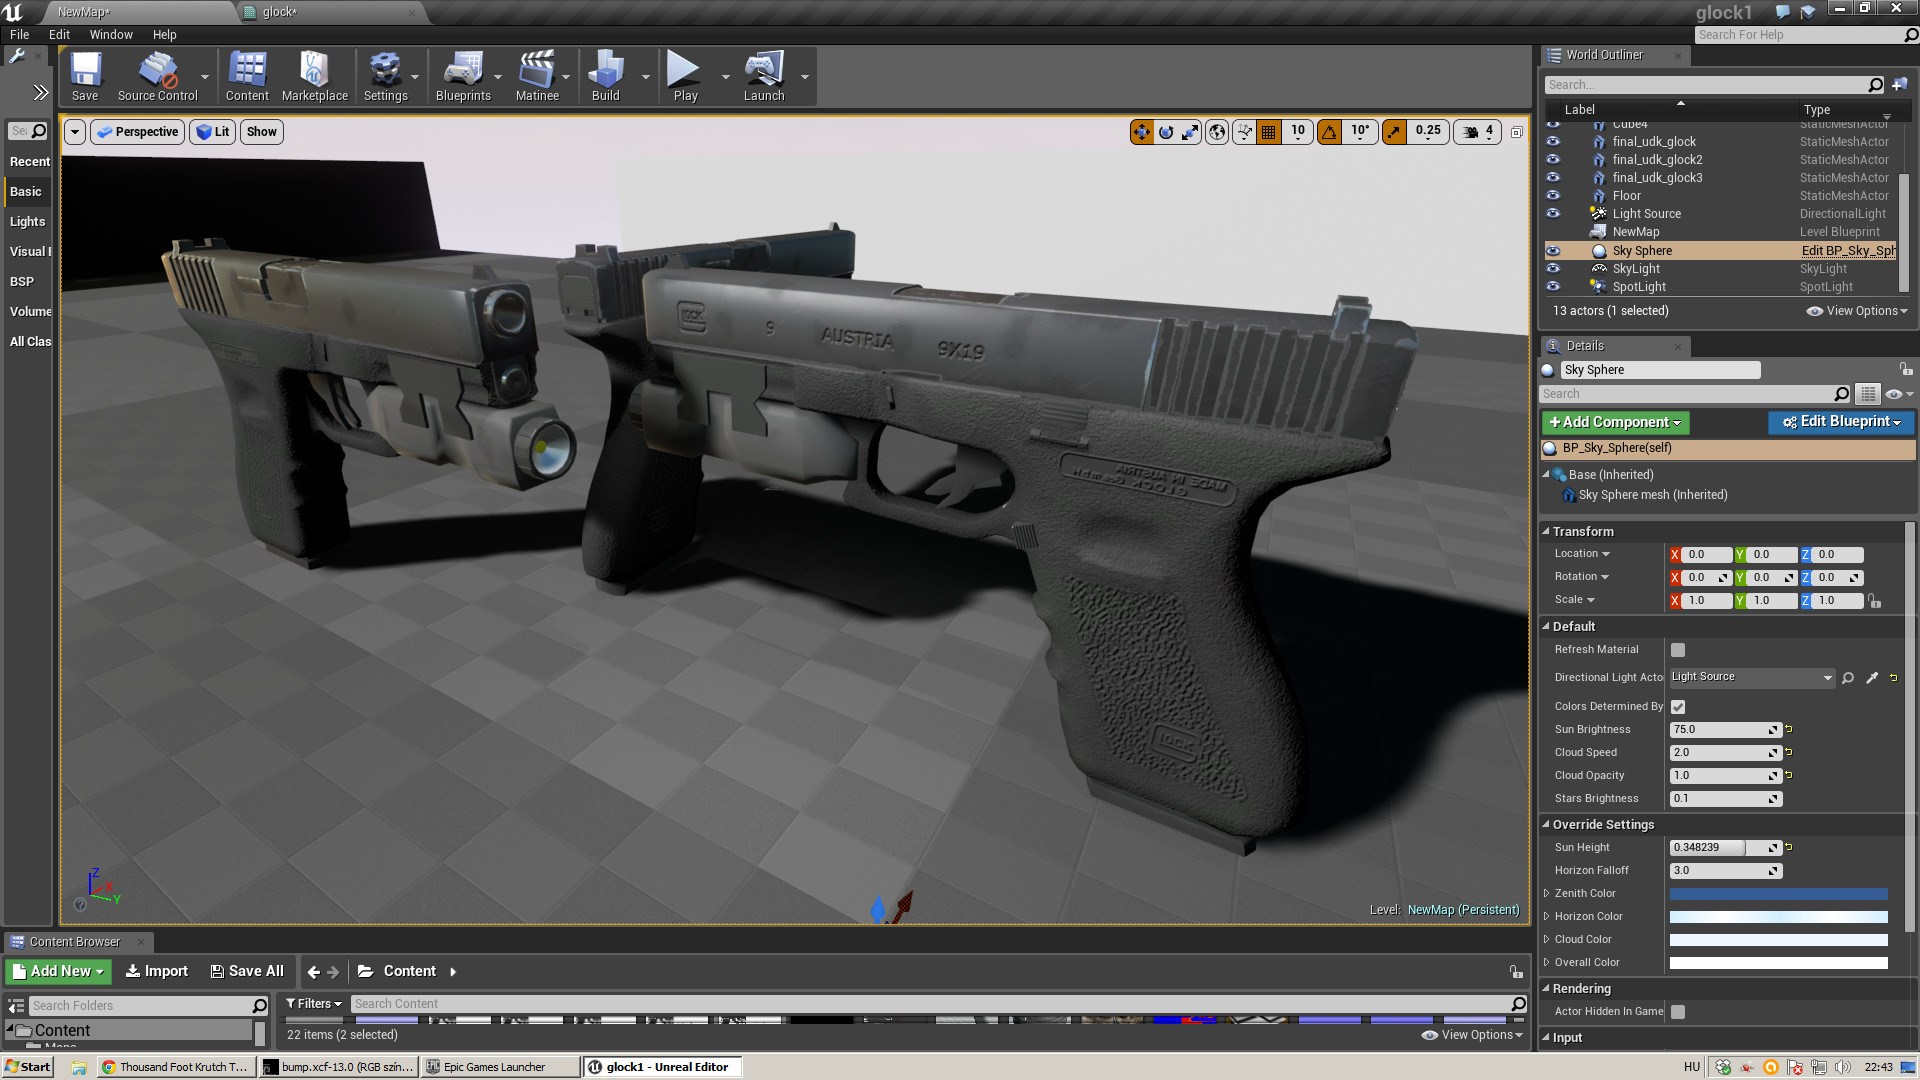 Glock 19 in UE4. unfinished by Sipi1989.